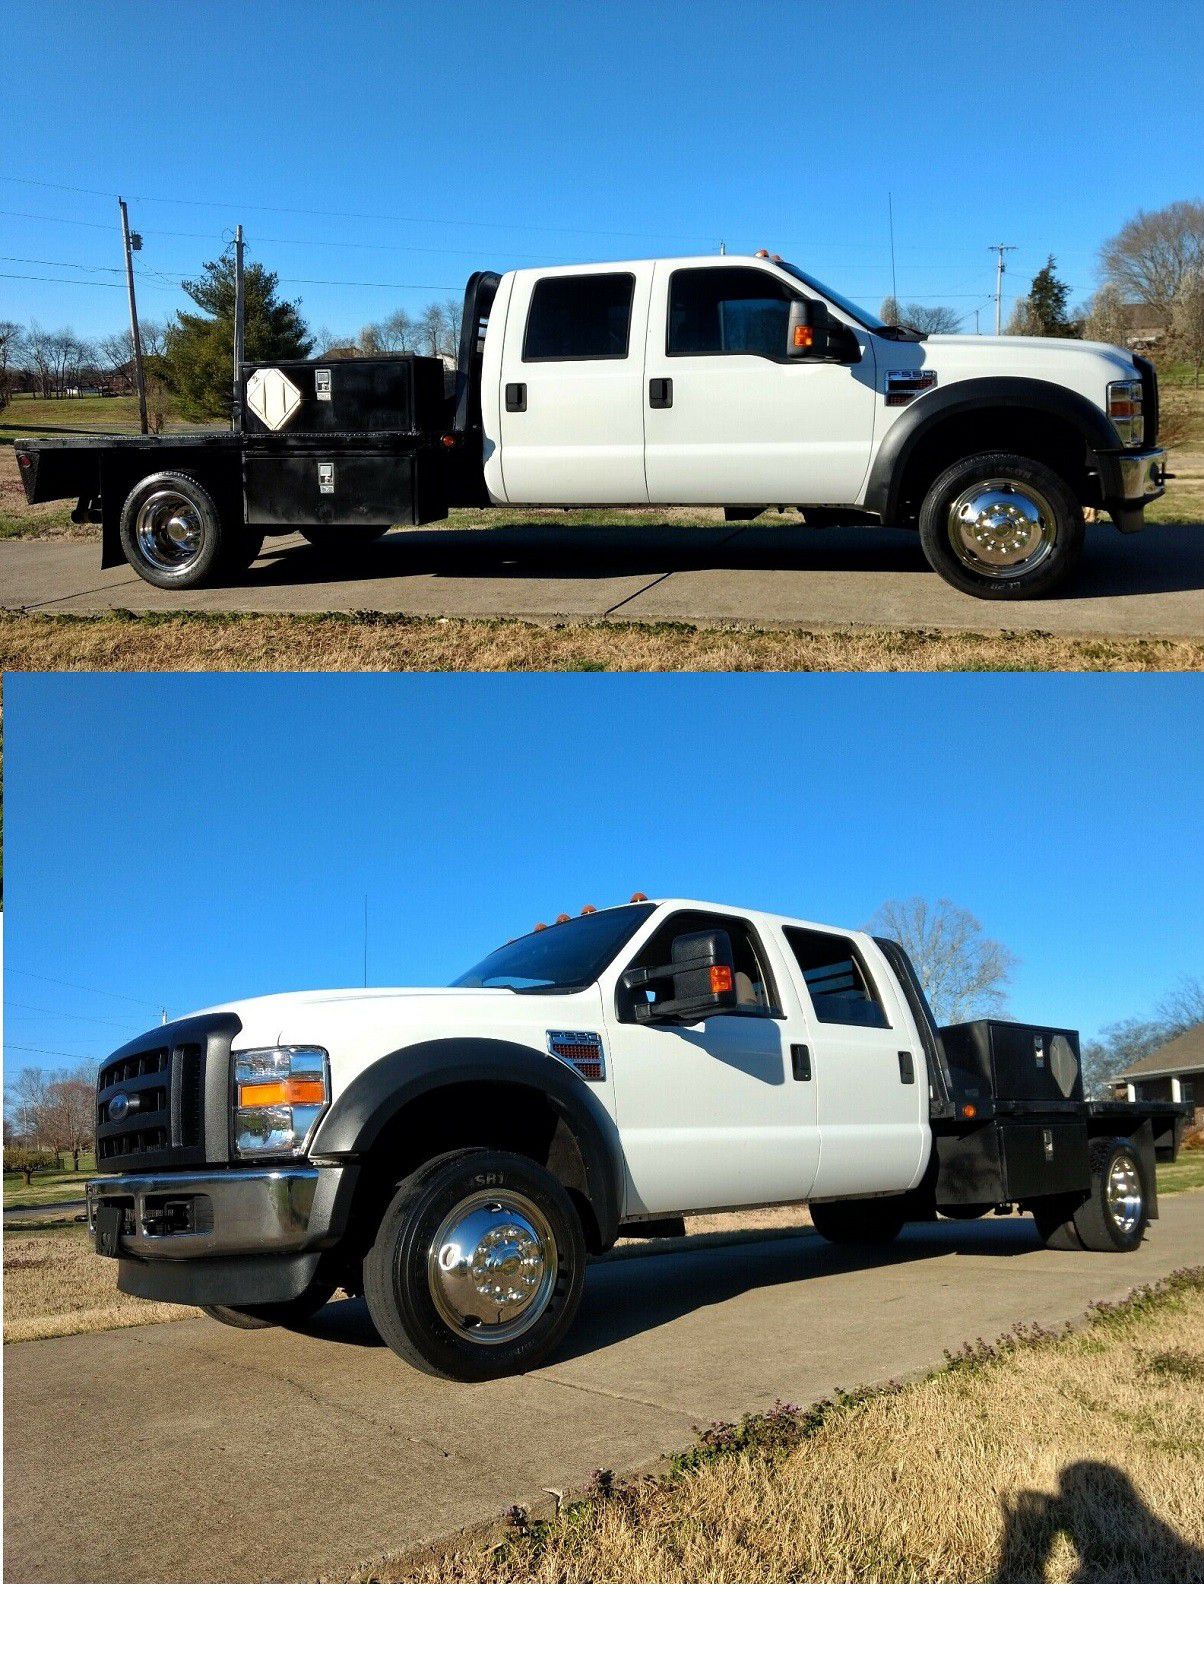 F550 Power stroke Diesel Crew4x4 - ford - Dually - 4x4 with Custom Flatbed Dually Crew Aftermarket Deleted DPF and EGR for better MPG